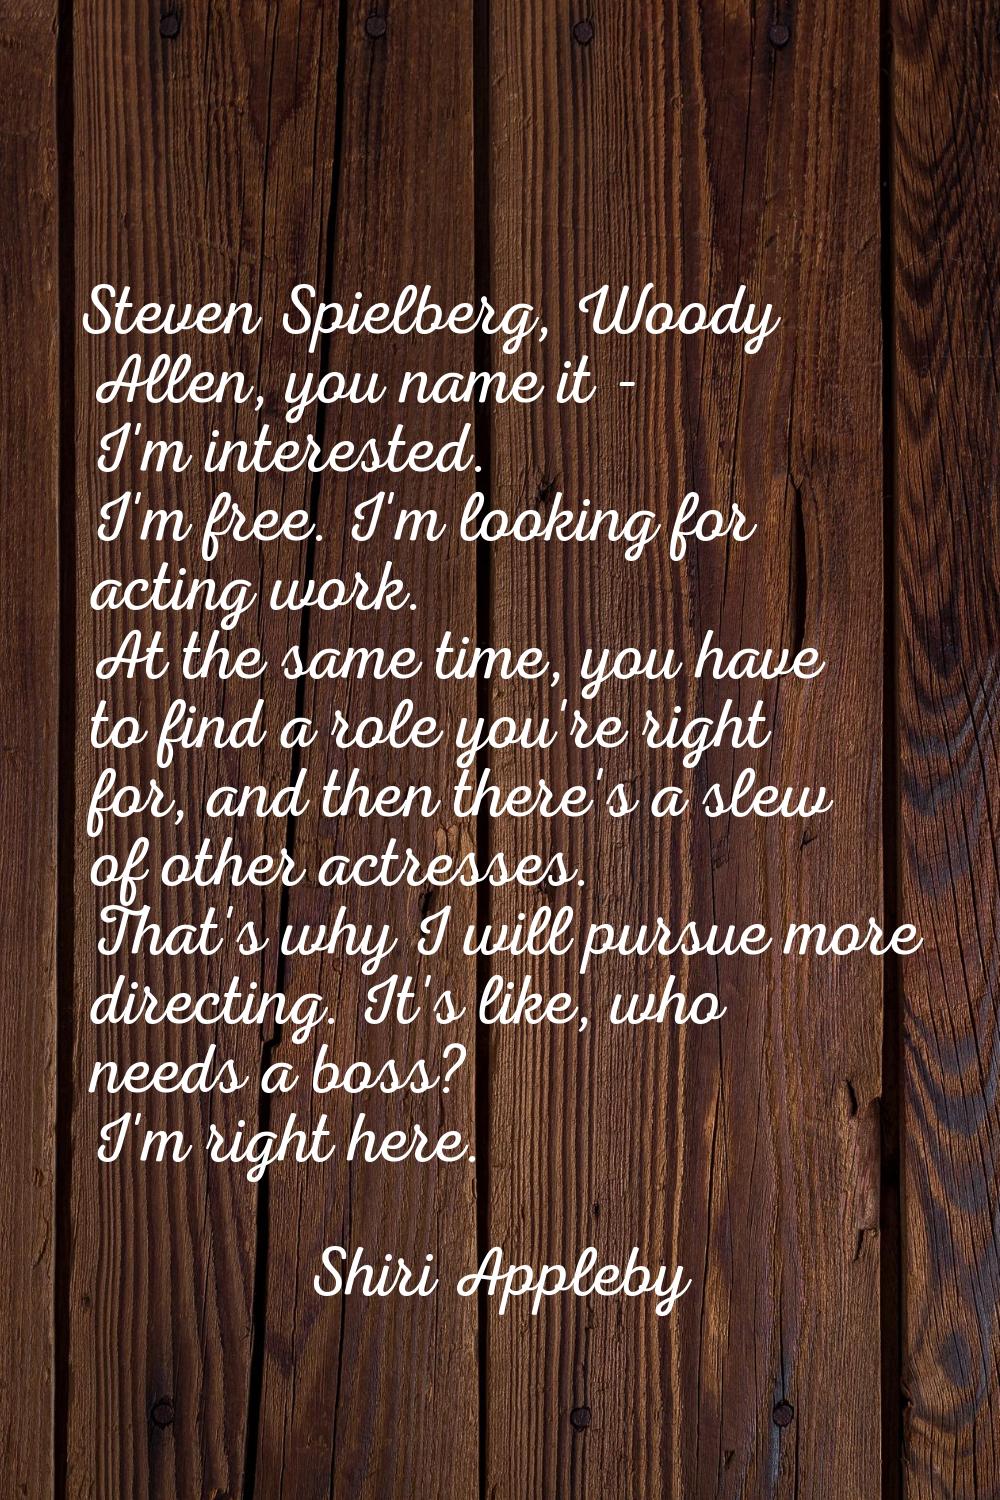 Steven Spielberg, Woody Allen, you name it - I'm interested. I'm free. I'm looking for acting work.